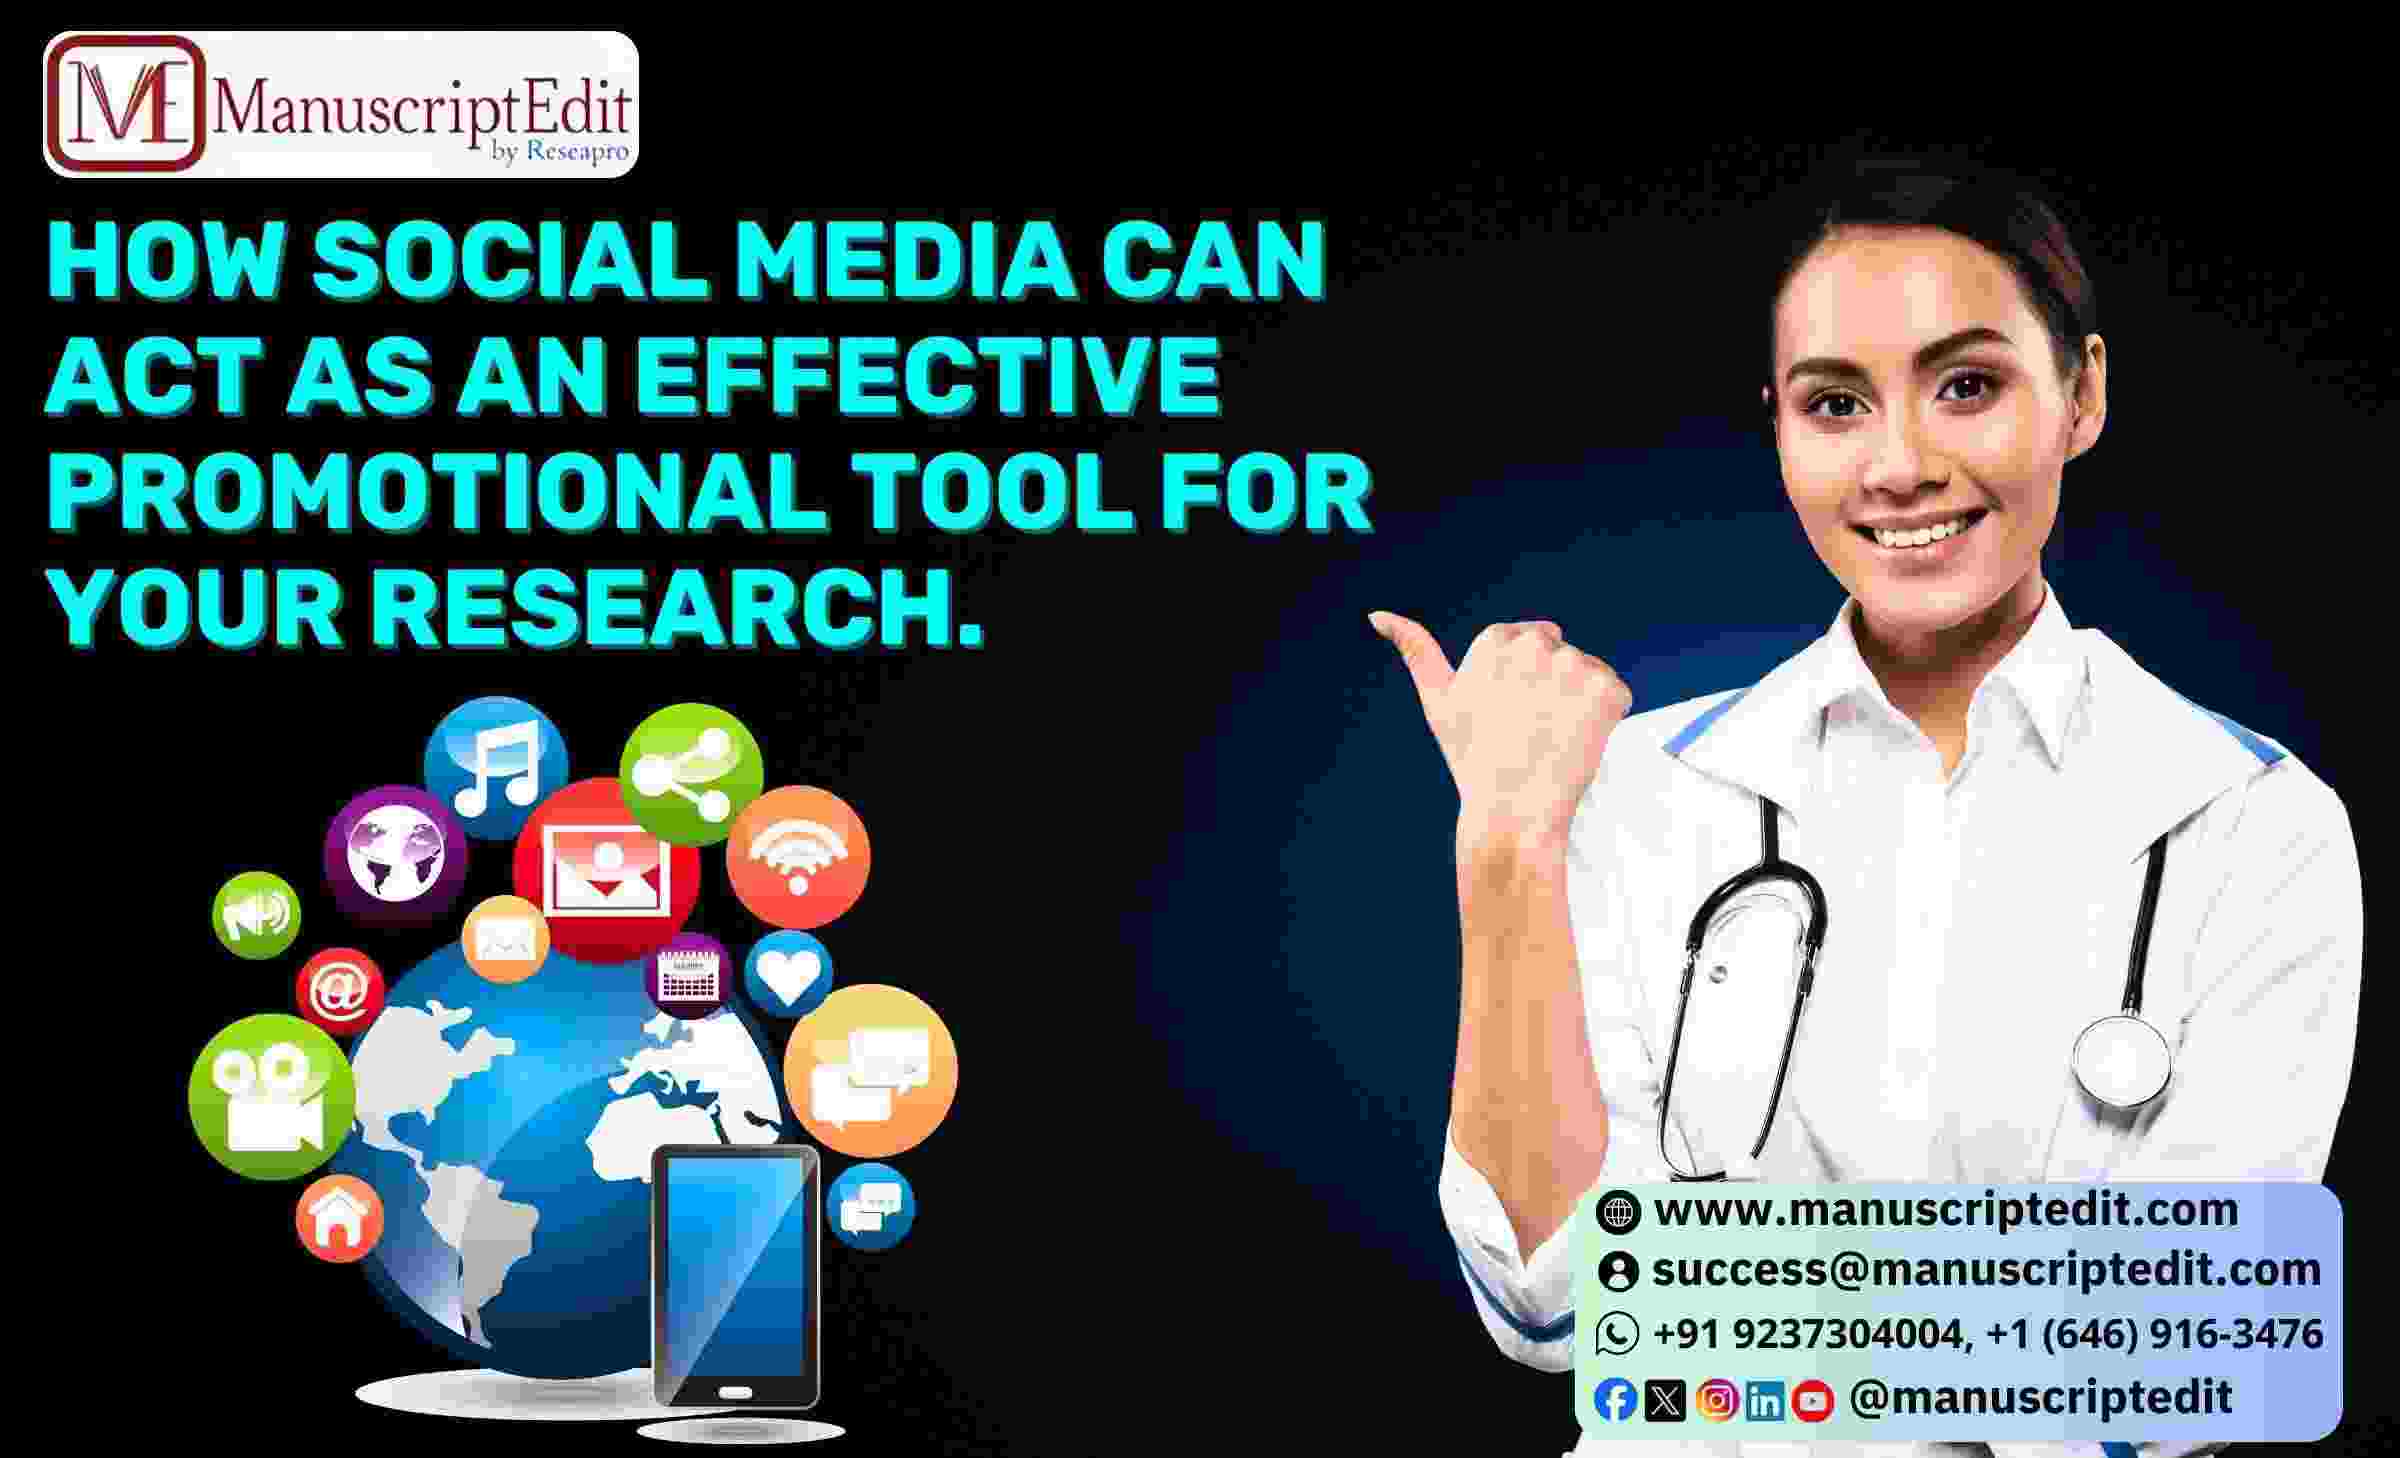 How Social Media Can Act as an Effective Promotional Tool for your Research?